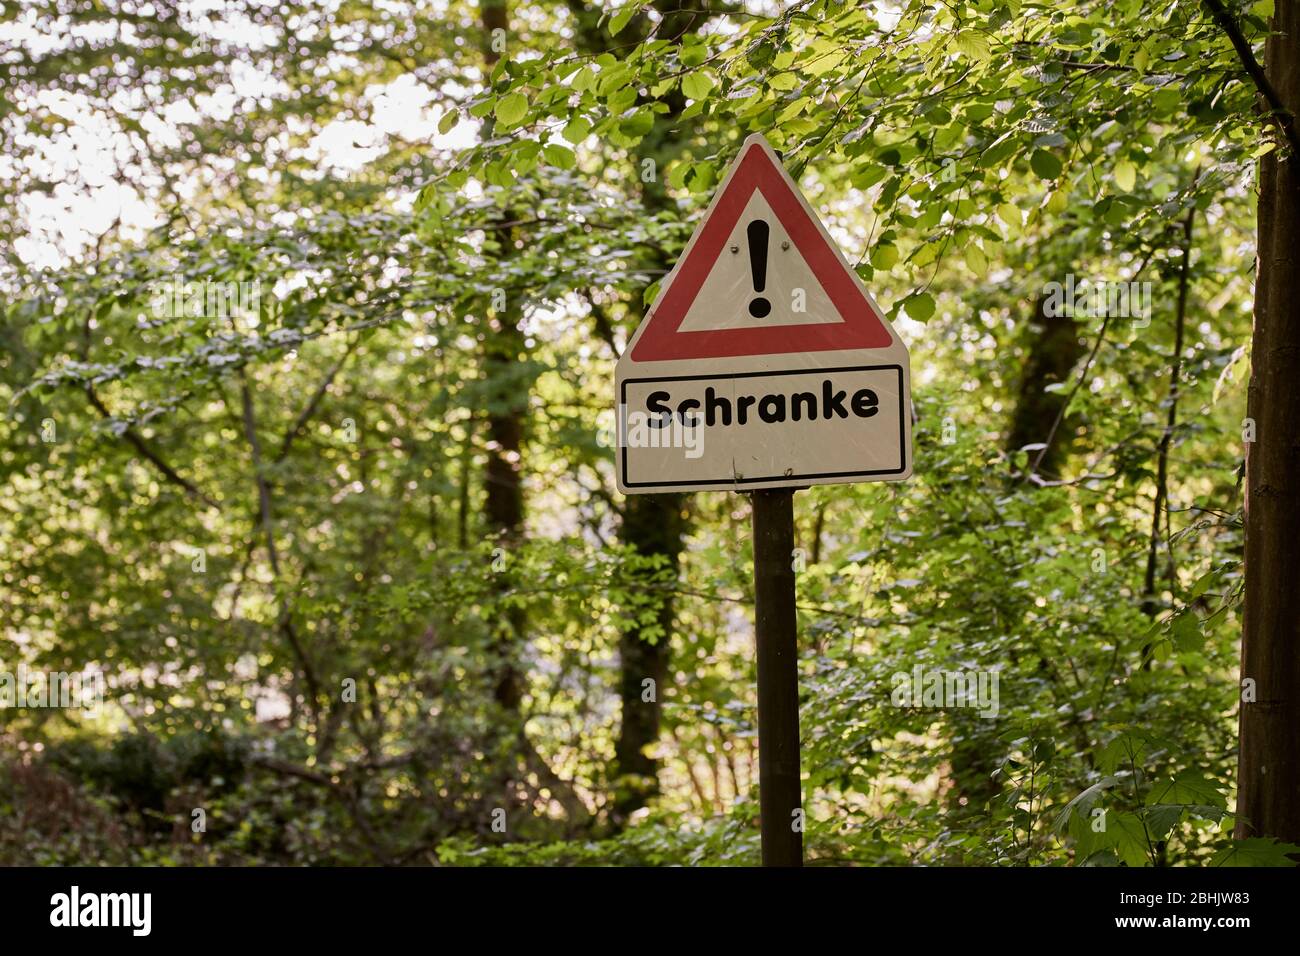 A red and white warning sign for a railroad crossing gate in the forest on a sunny spring day Stock Photo